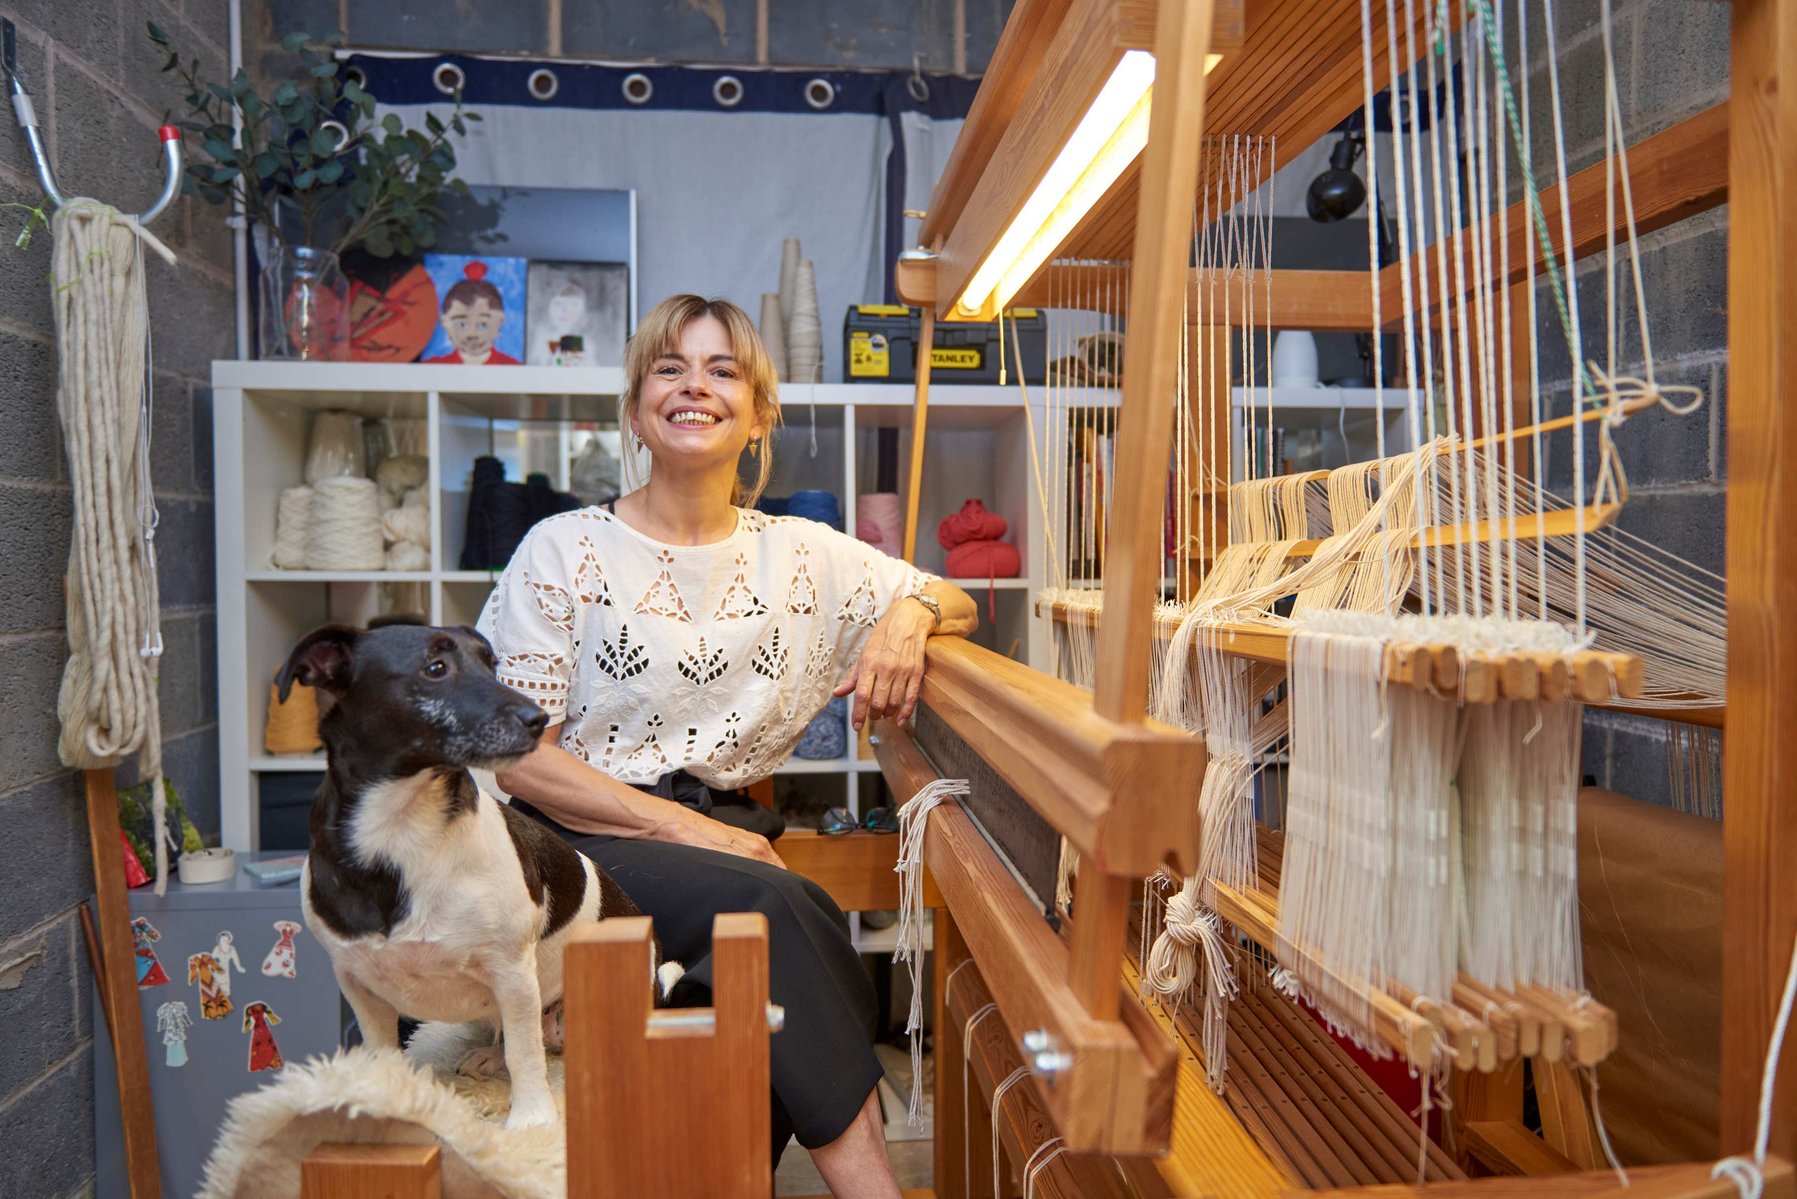 Woman smiling with dog with a loom.